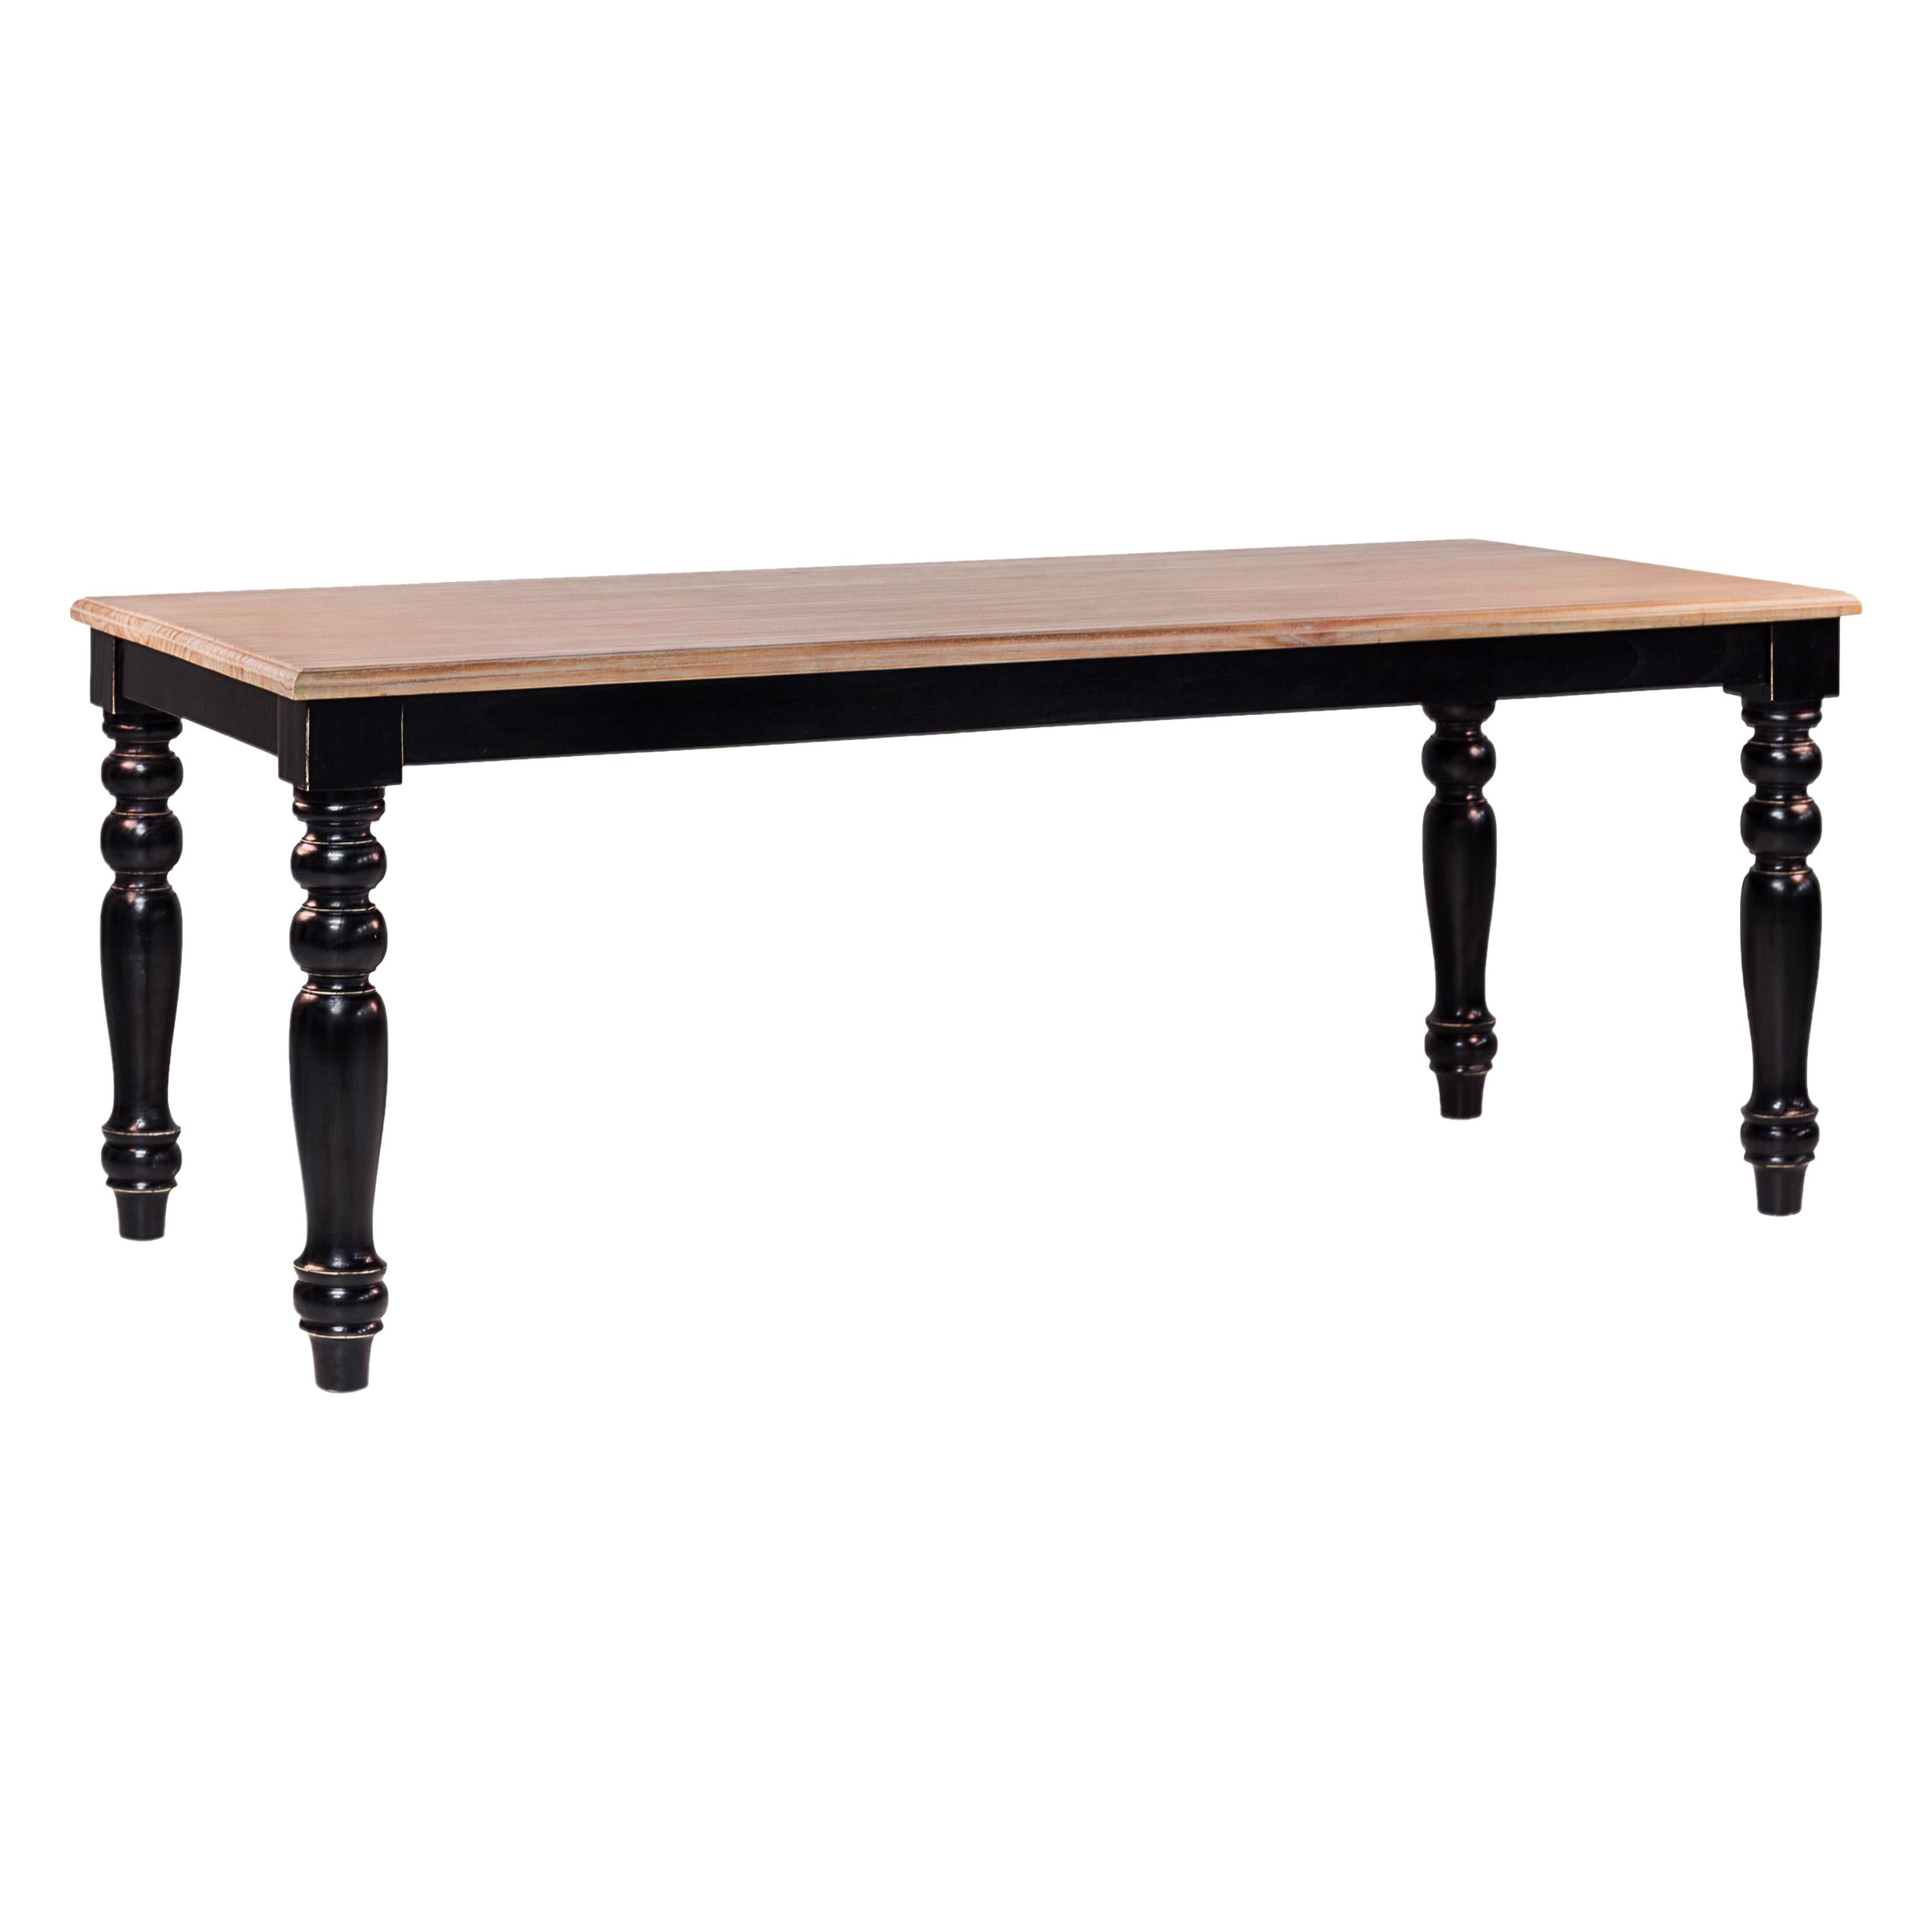 French Provincial Style Dining Room Table with Black Ebonized legs